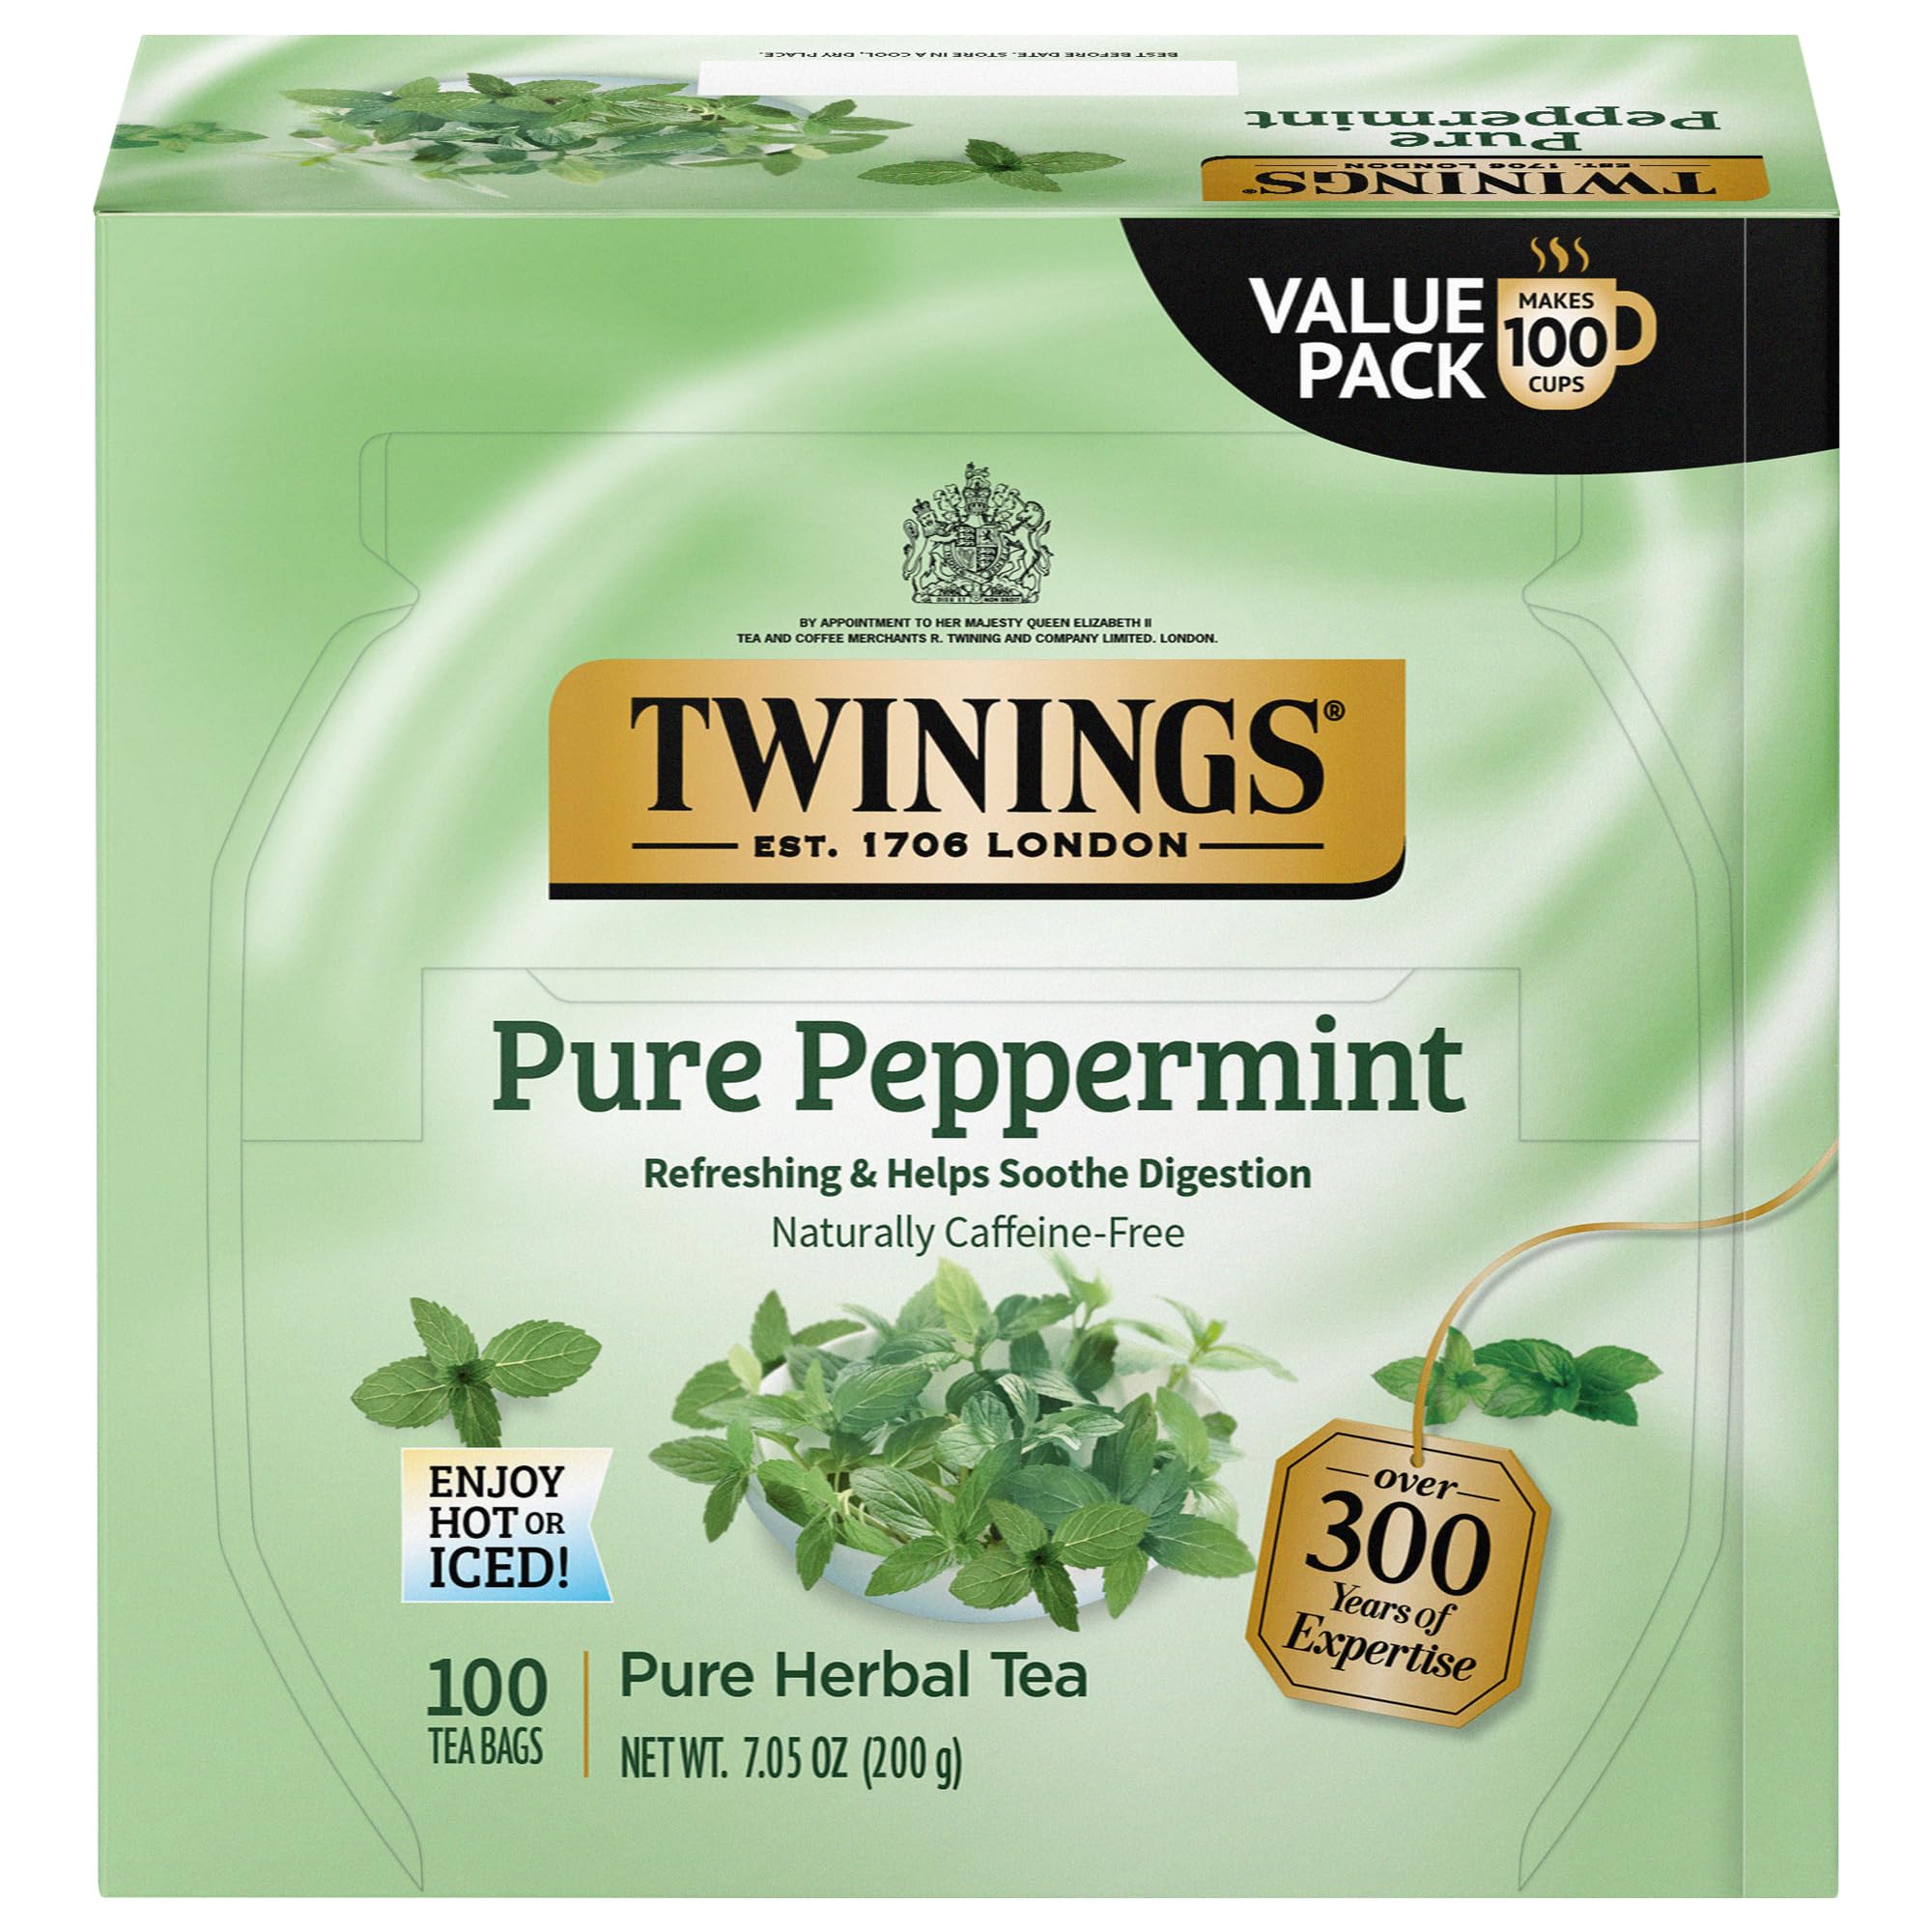 Twinings Pure Peppermint, 100 Individually Wrapped Tea Bags, Fresh Minty Flavour, Naturally Caffeine Free, 100 Count 13.98 $13.28